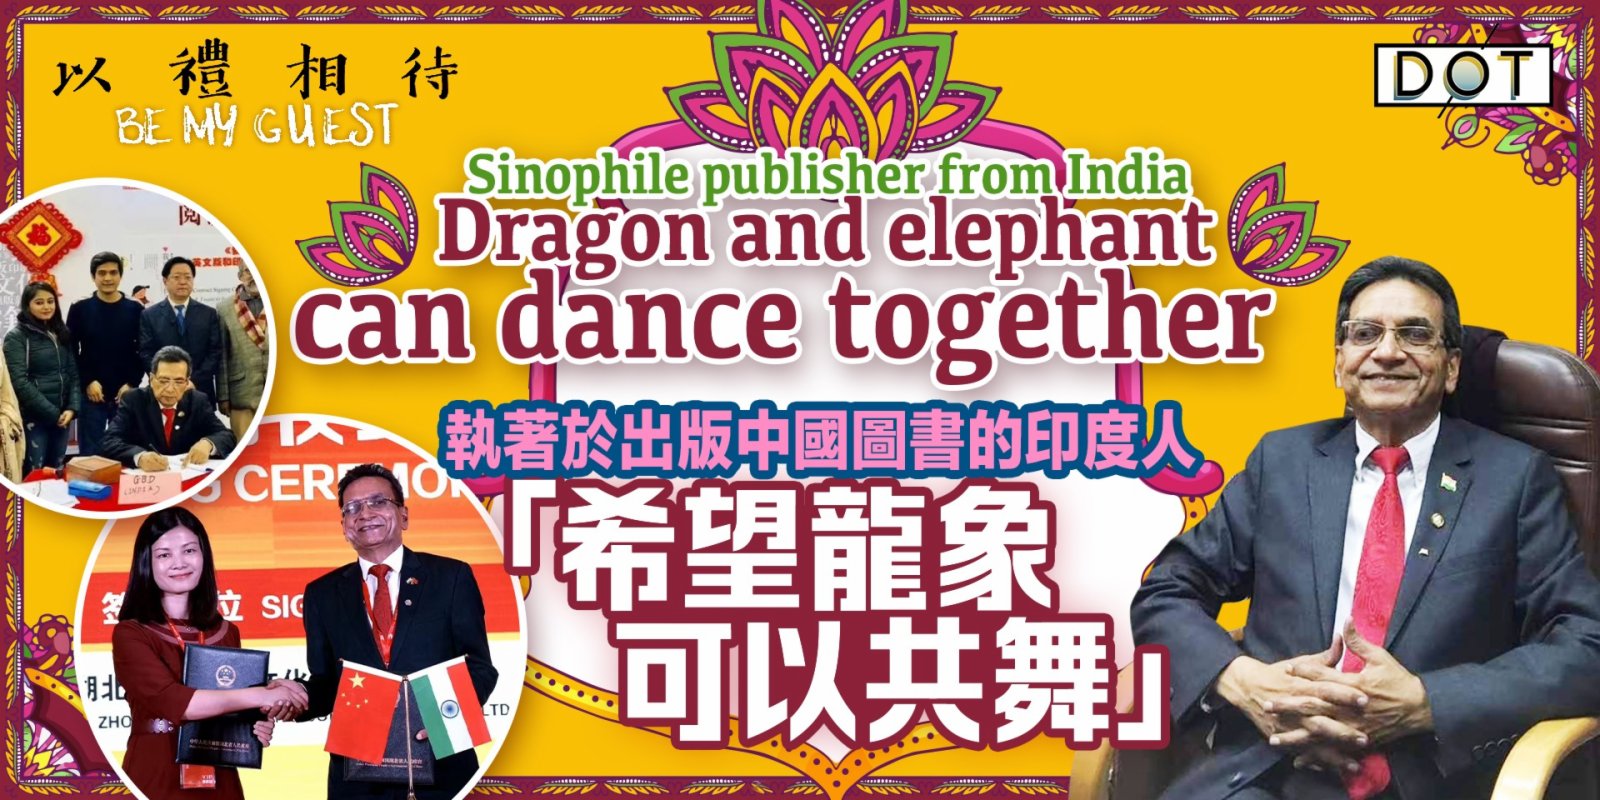 Be My Guest | Sinophile publisher from India: 'Dragon and elephant can dance together'